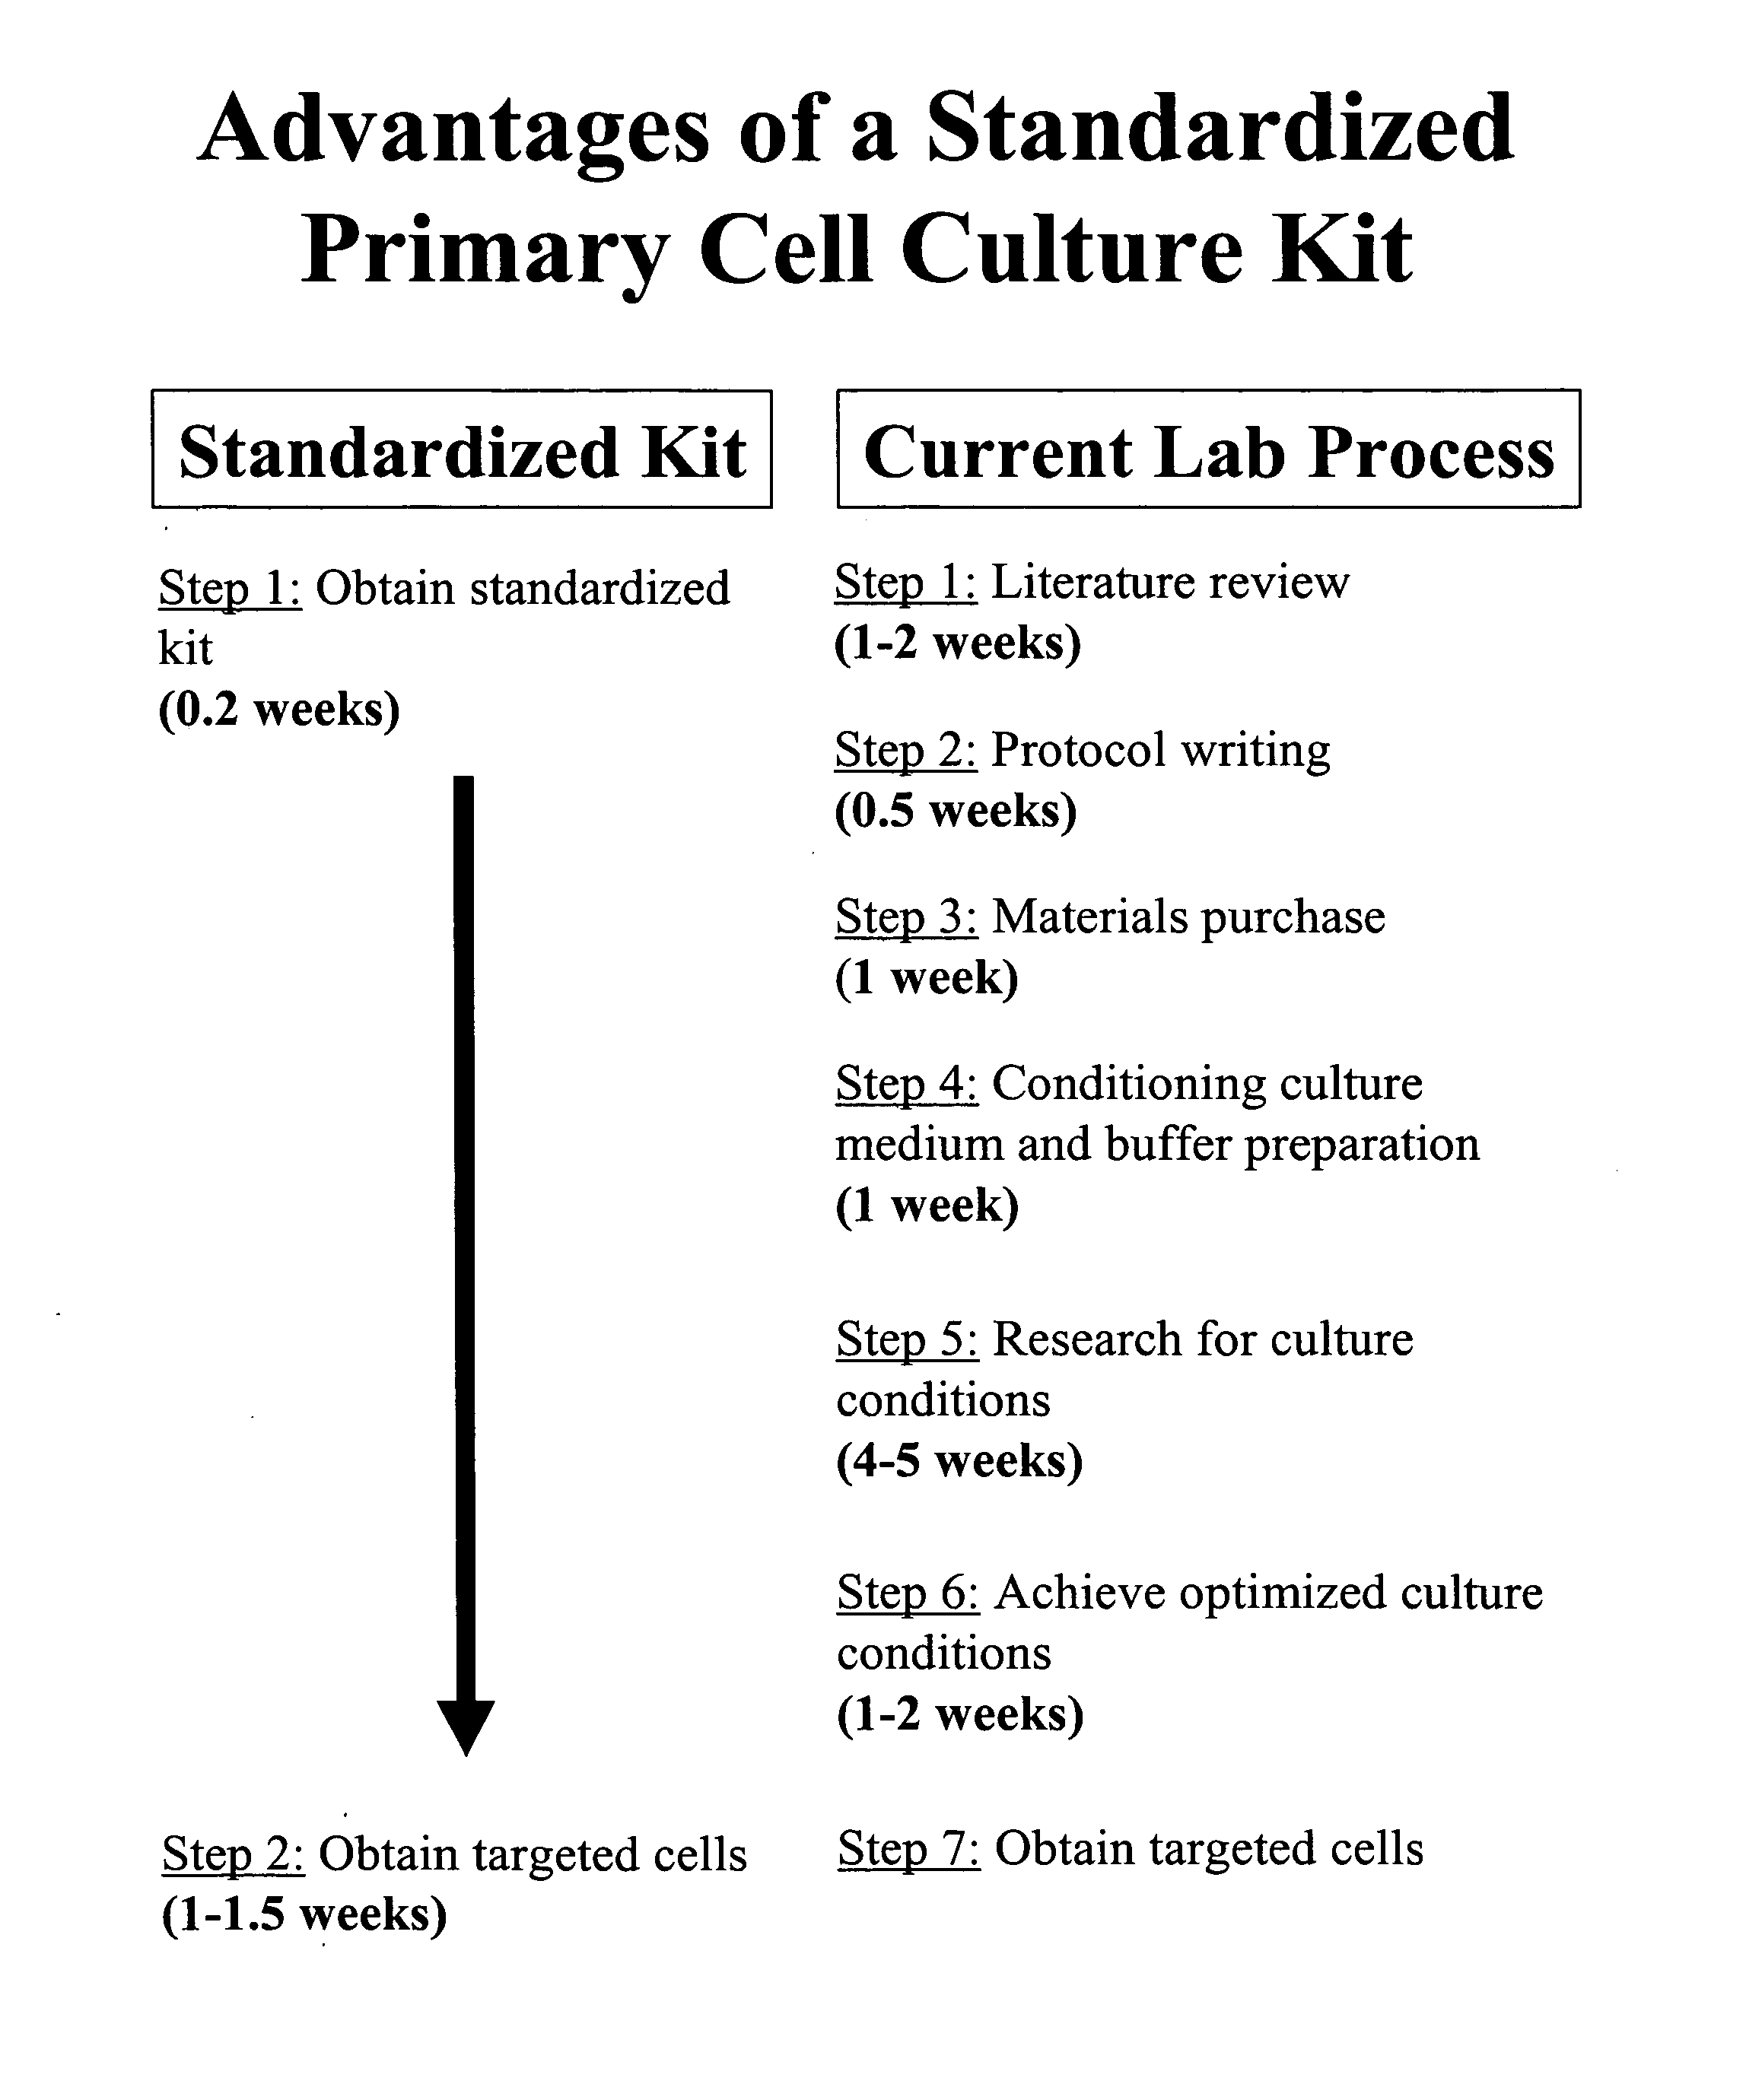 Standardization of processes for culturing primary cells